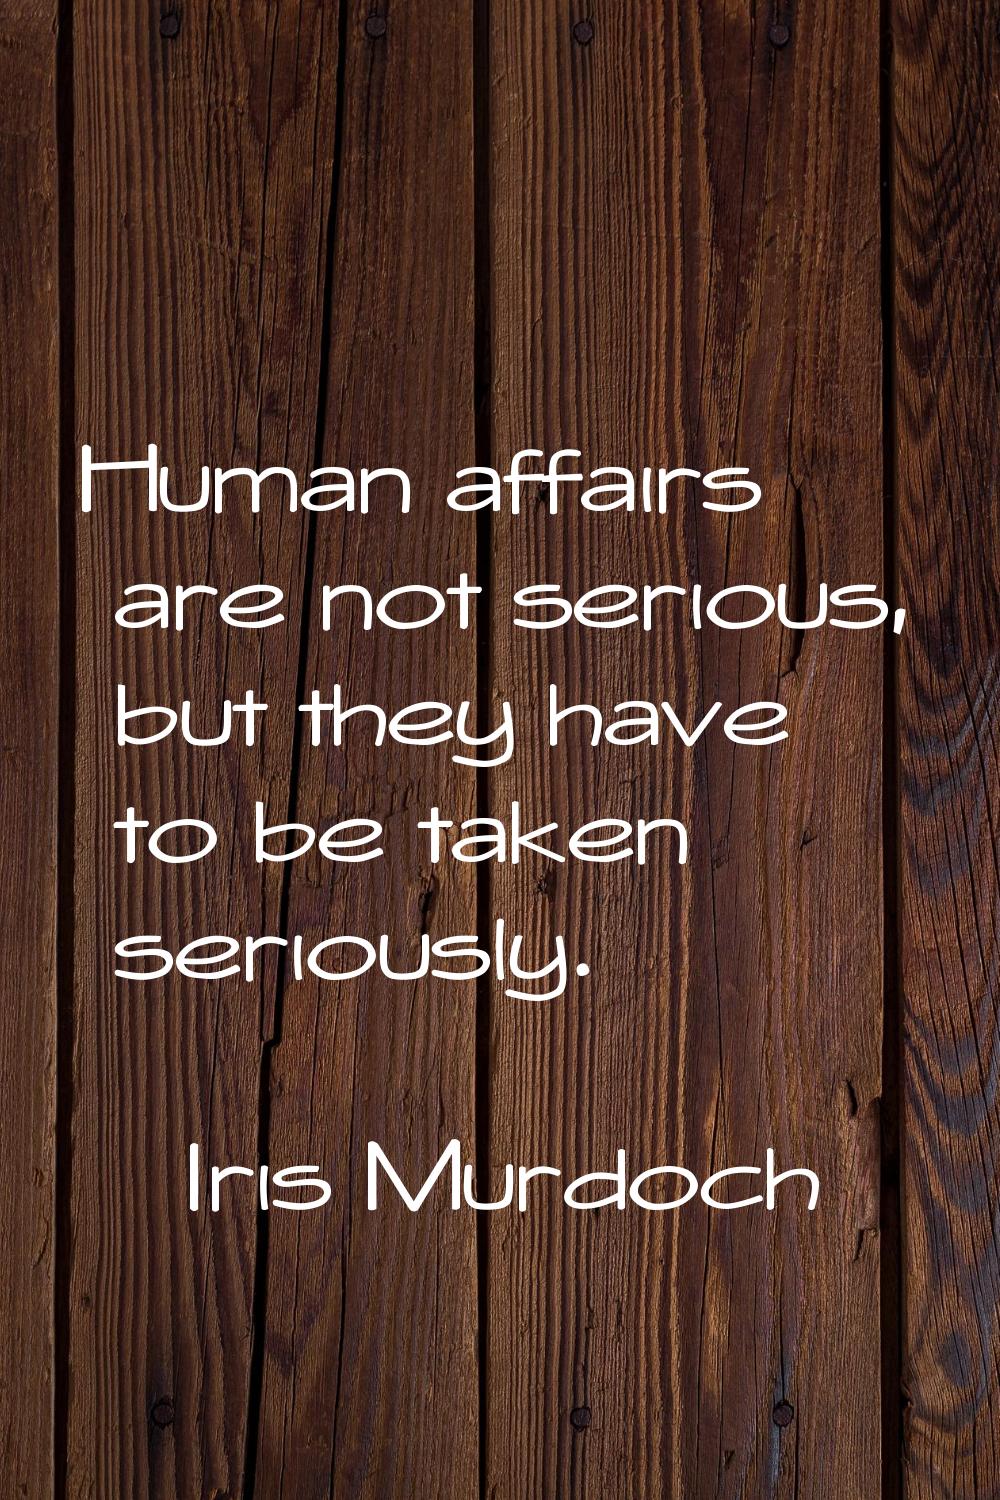 Human affairs are not serious, but they have to be taken seriously.